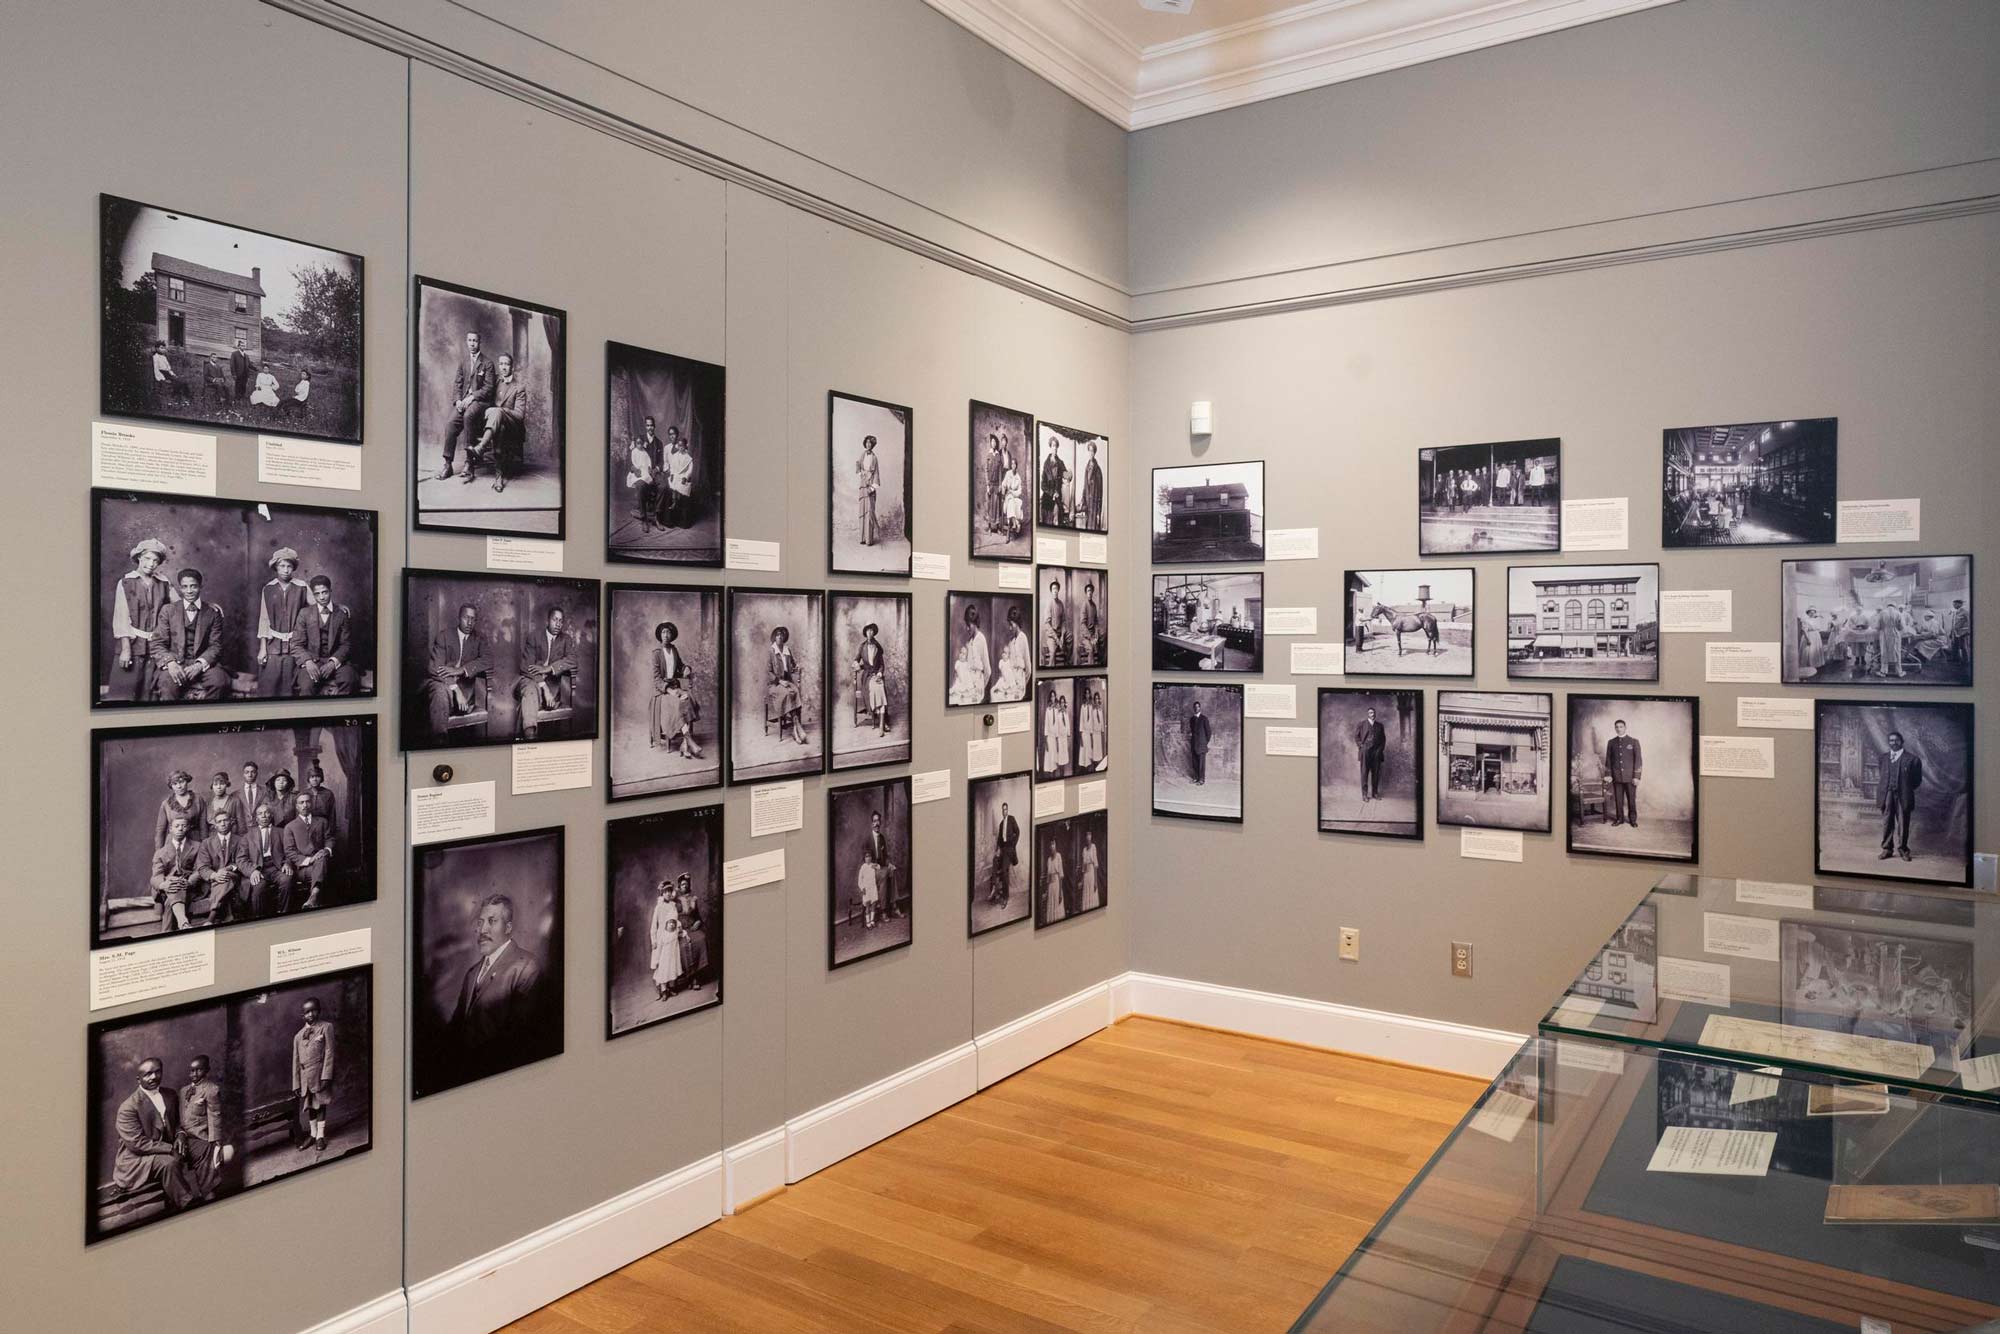 A room view of portraits included in the exhibition